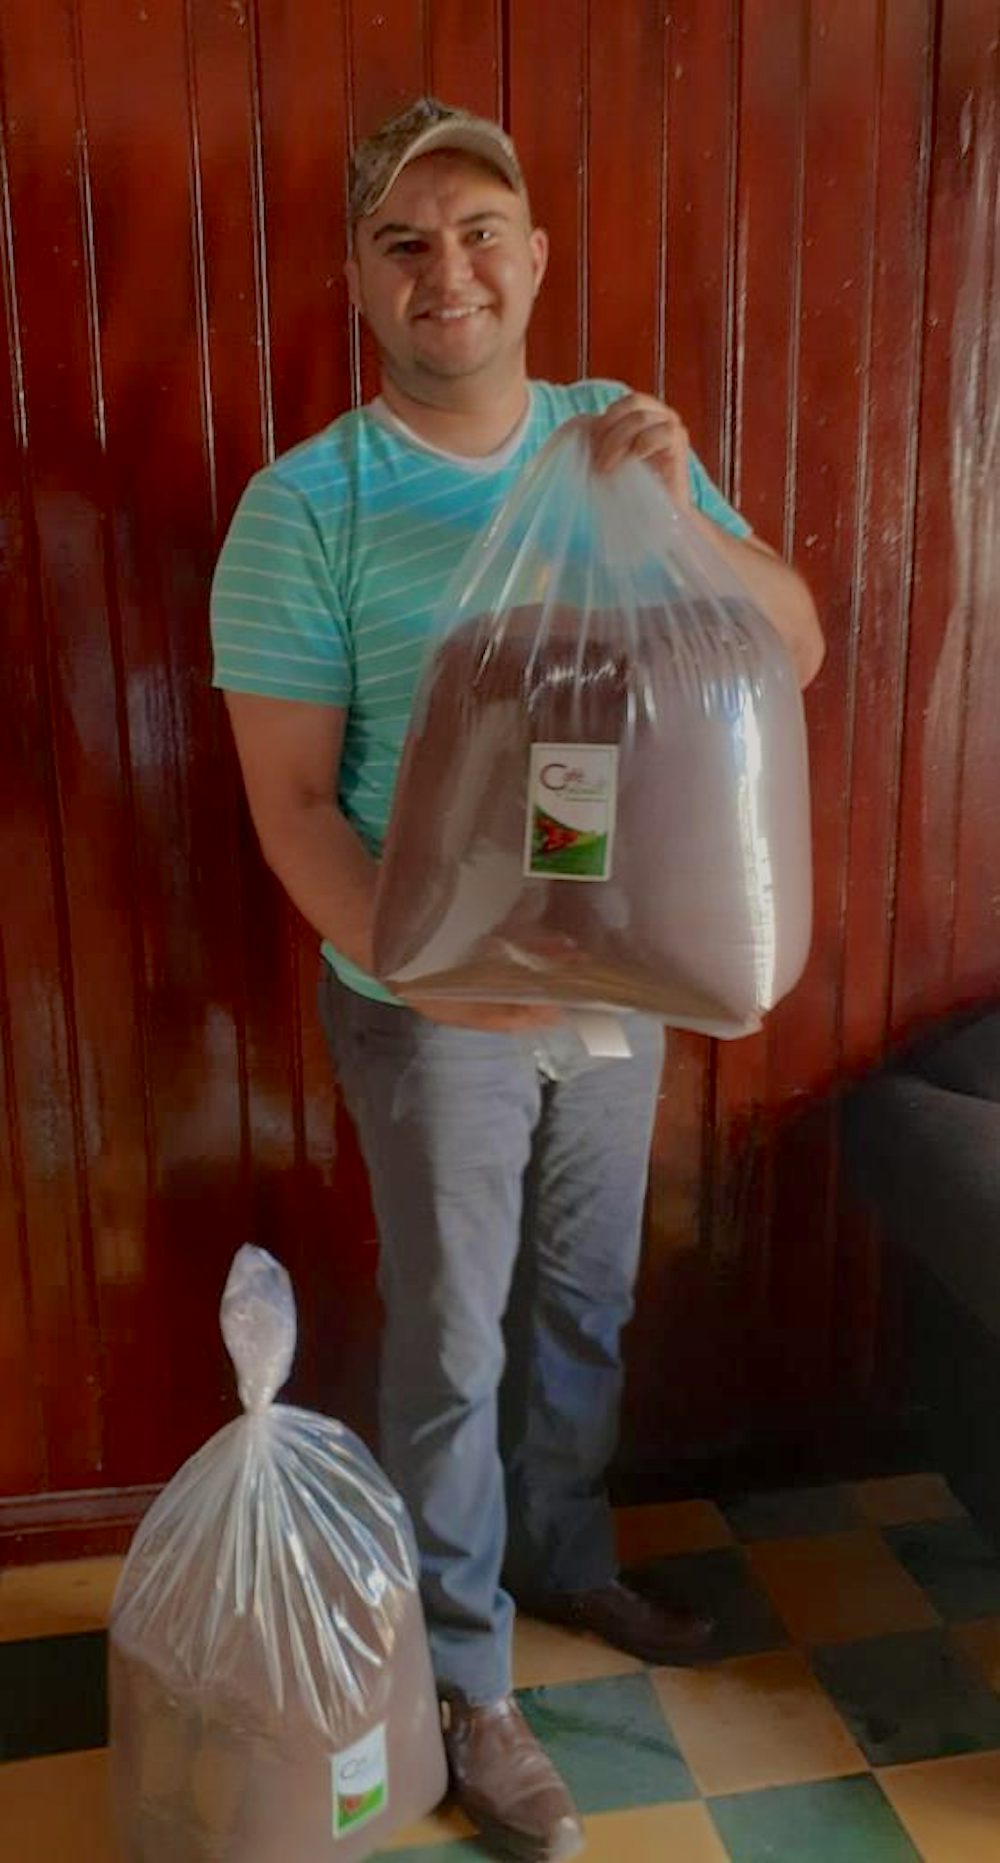 A man poses with a clear bag full of individual sachets of coffee.